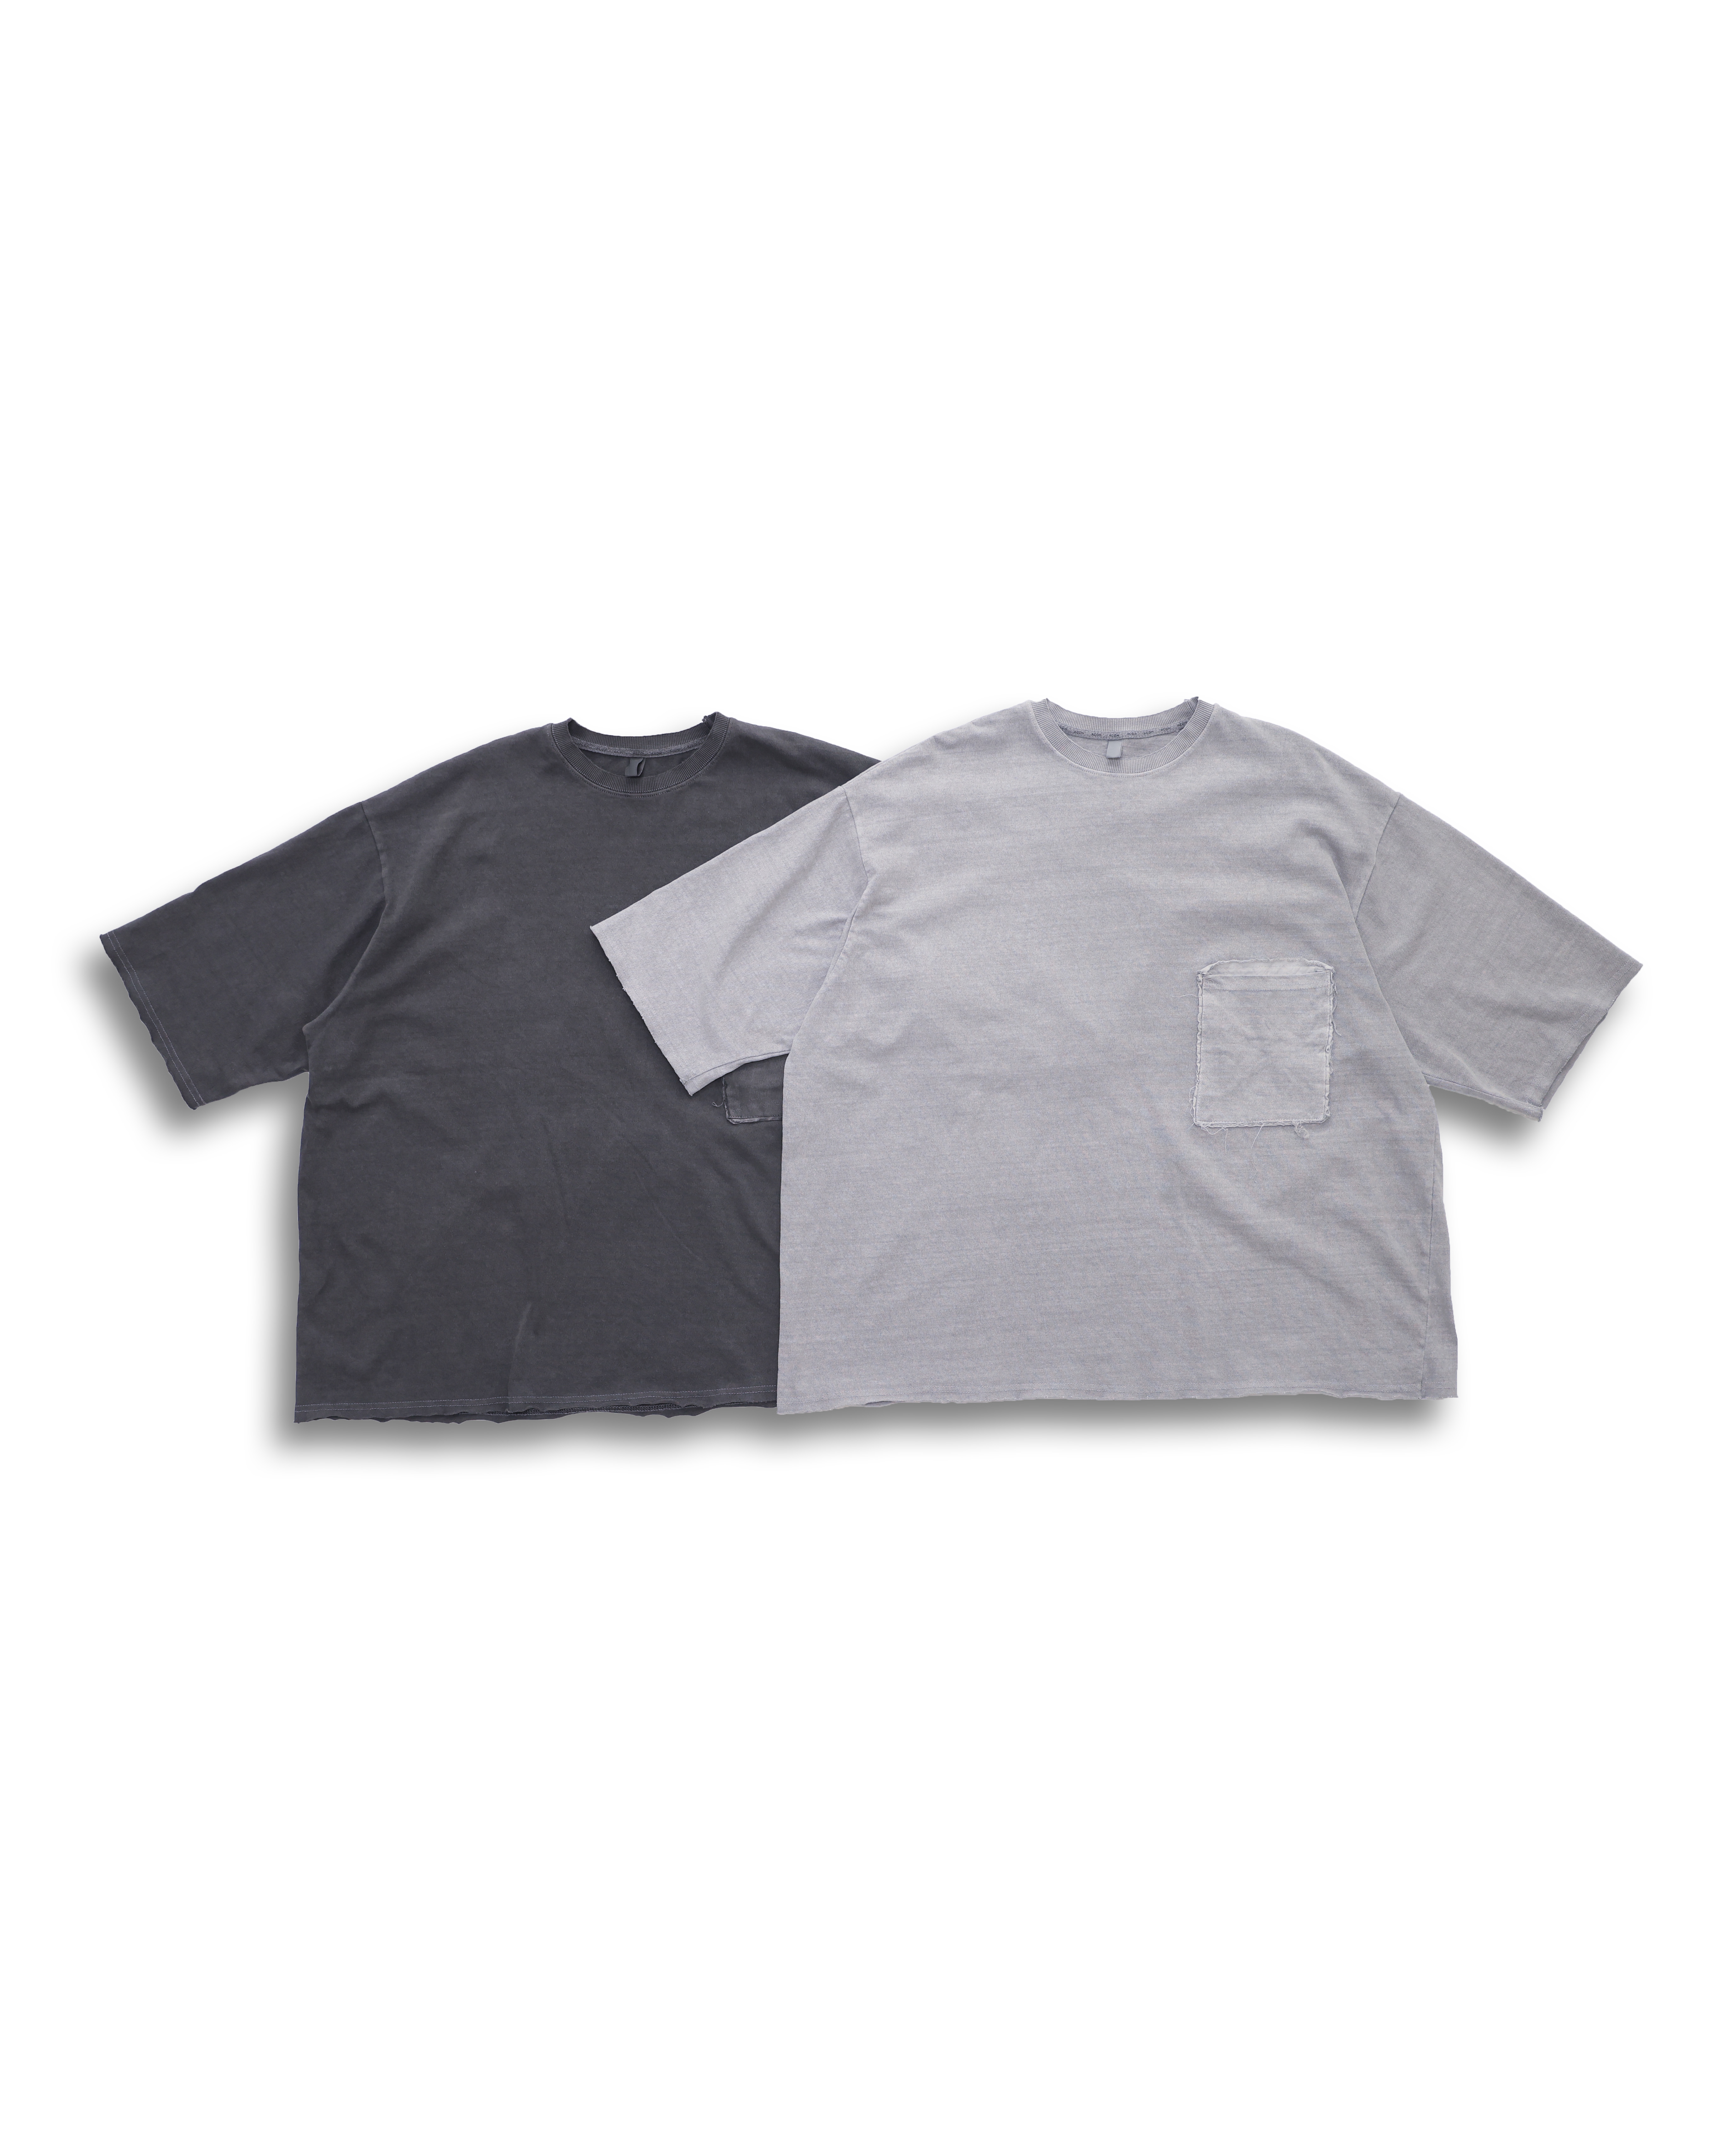 Pigments Over Pocket T-Shirts (Charcoal/Gray)